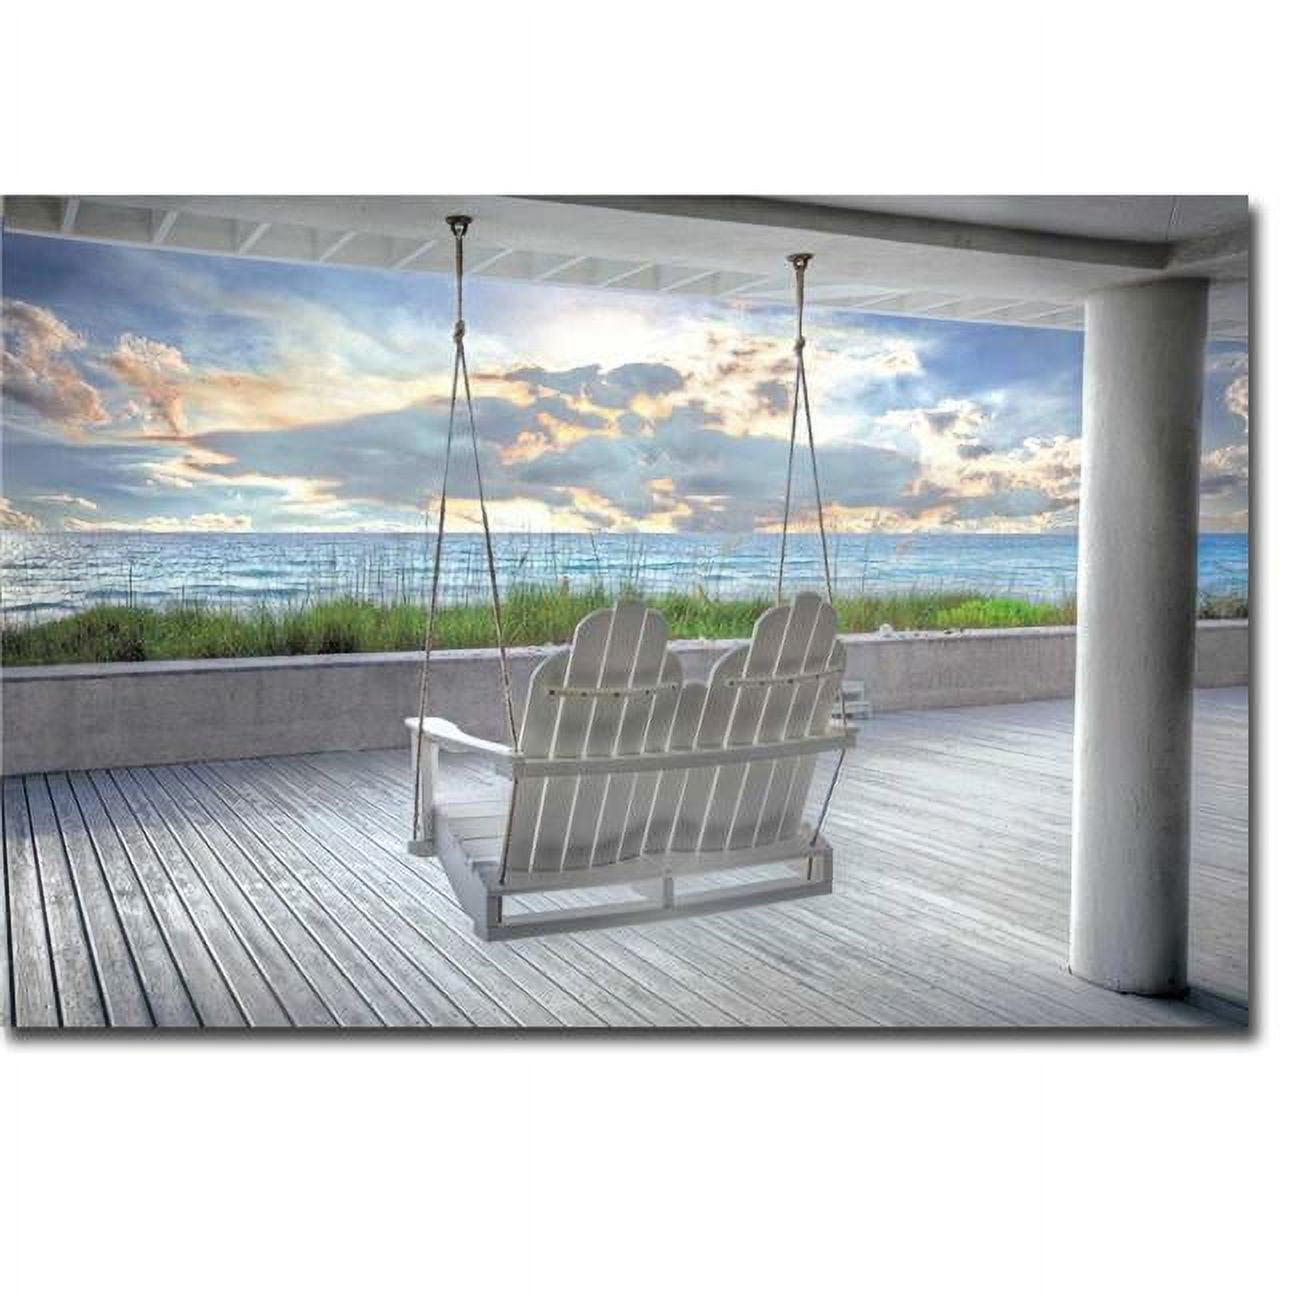 2436s493cg Swing At The Beach By Celebrate Life Gallery Premium Gallery-wrapped Canvas Giclee Art - Ready-to-hang, 24 X 36 X 1.5 In.